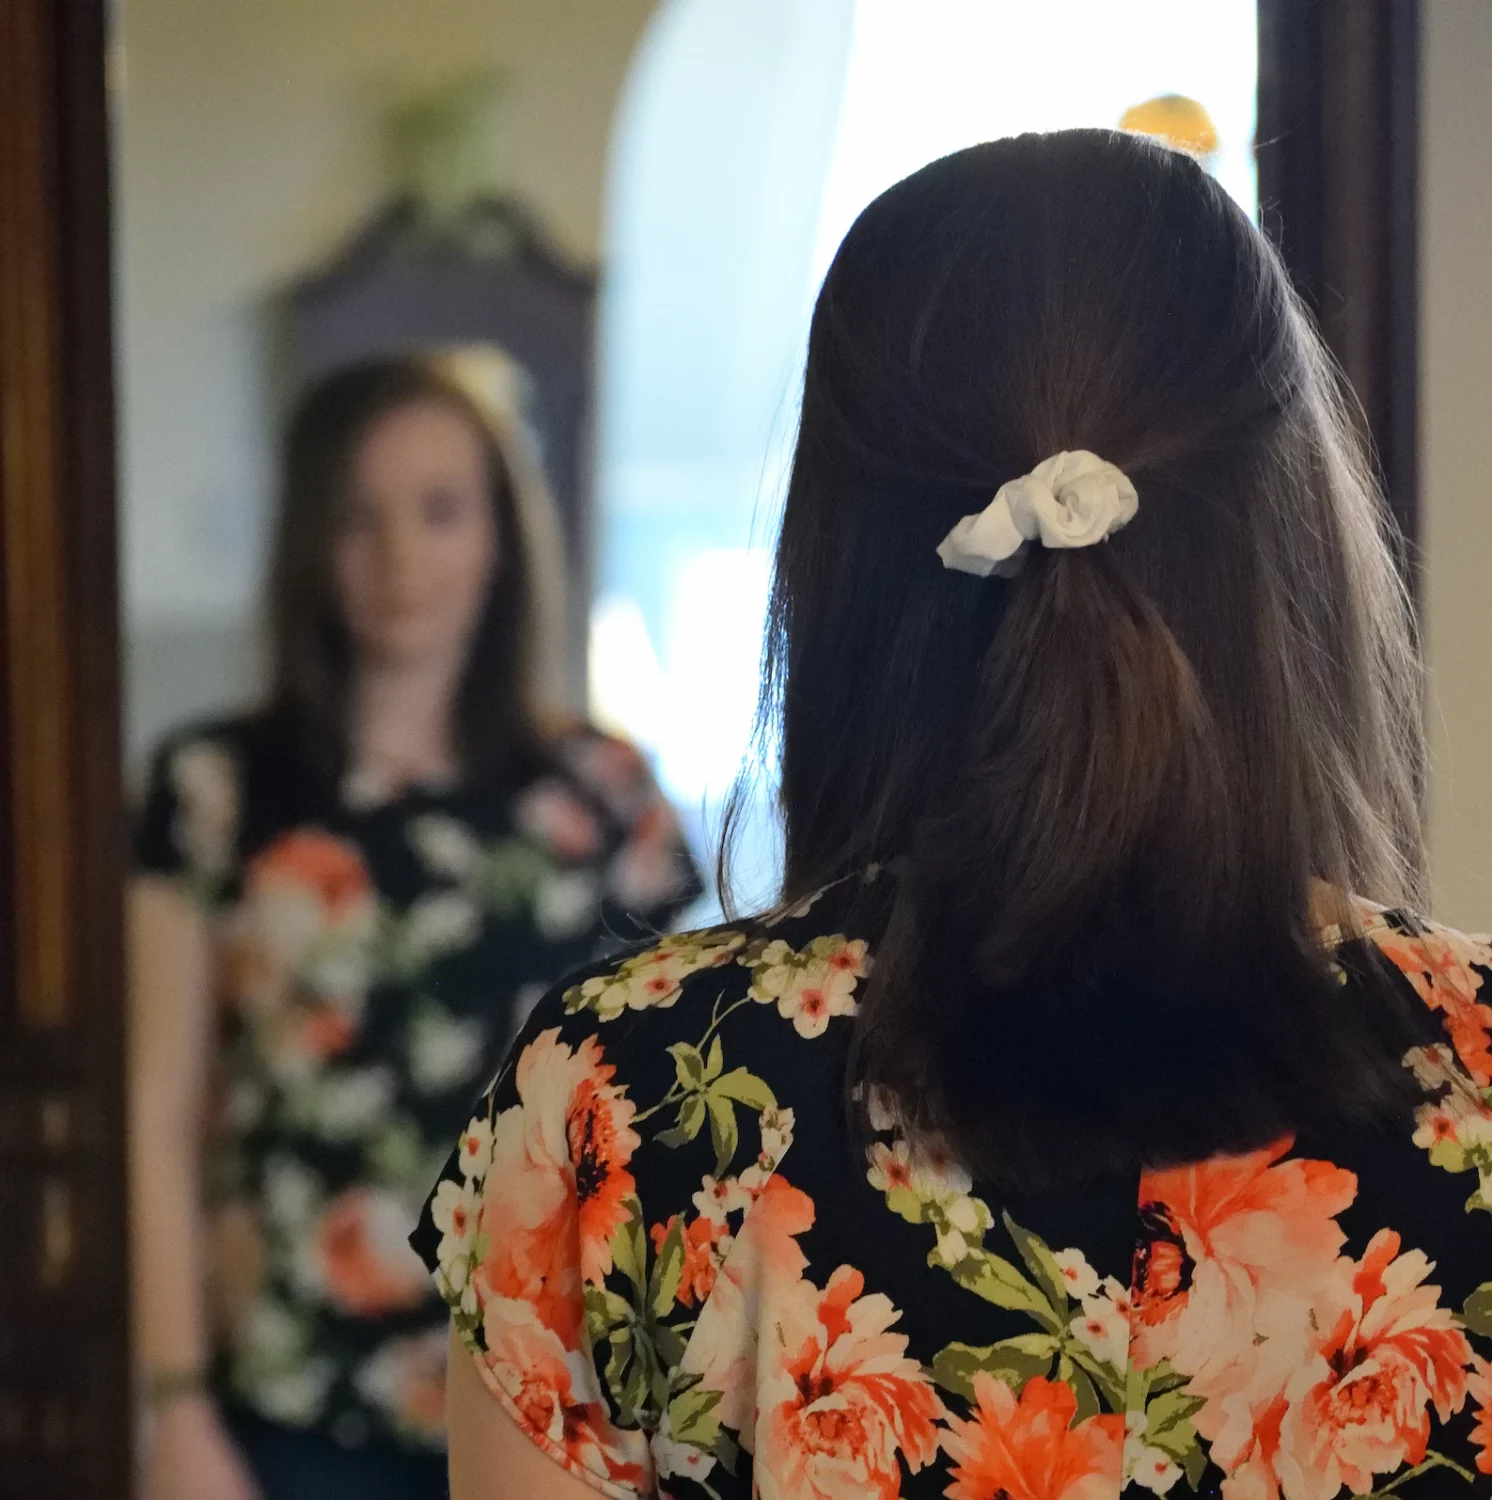 View of the back of a person head who is standing in front of mirror